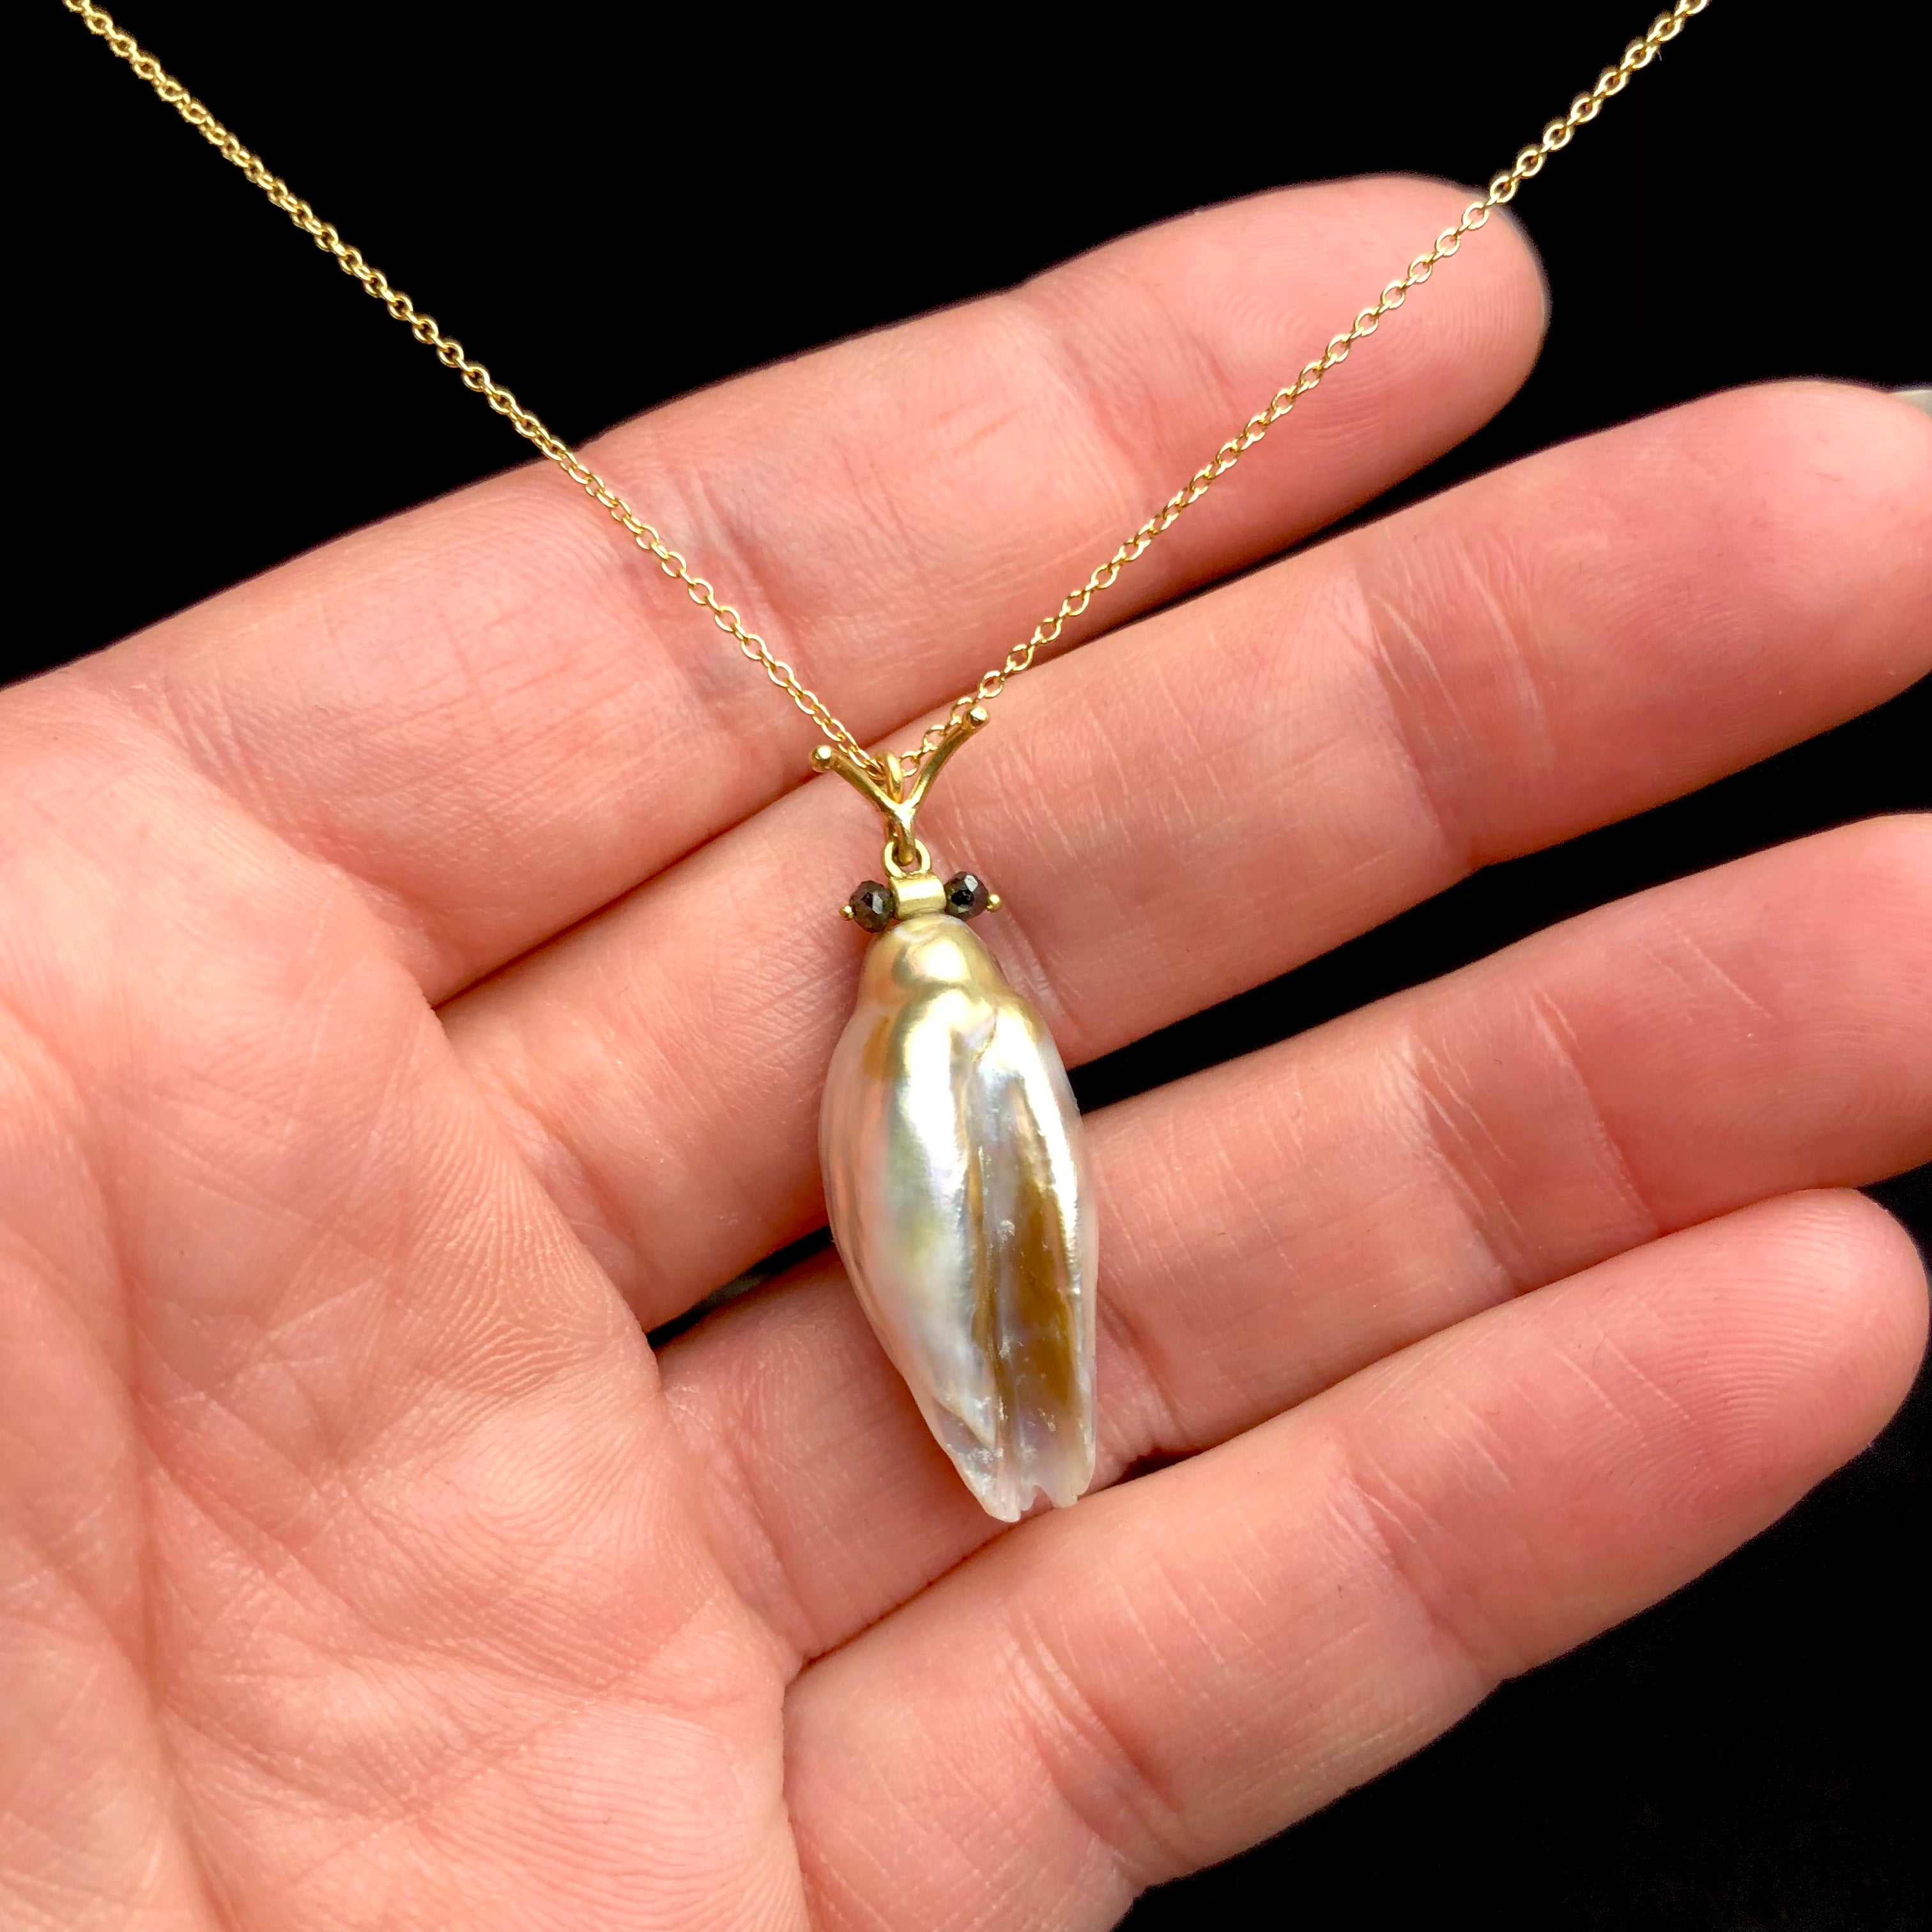 Golden pink pearl pendant with black diamond eyes and gold accents on chain shown in hand